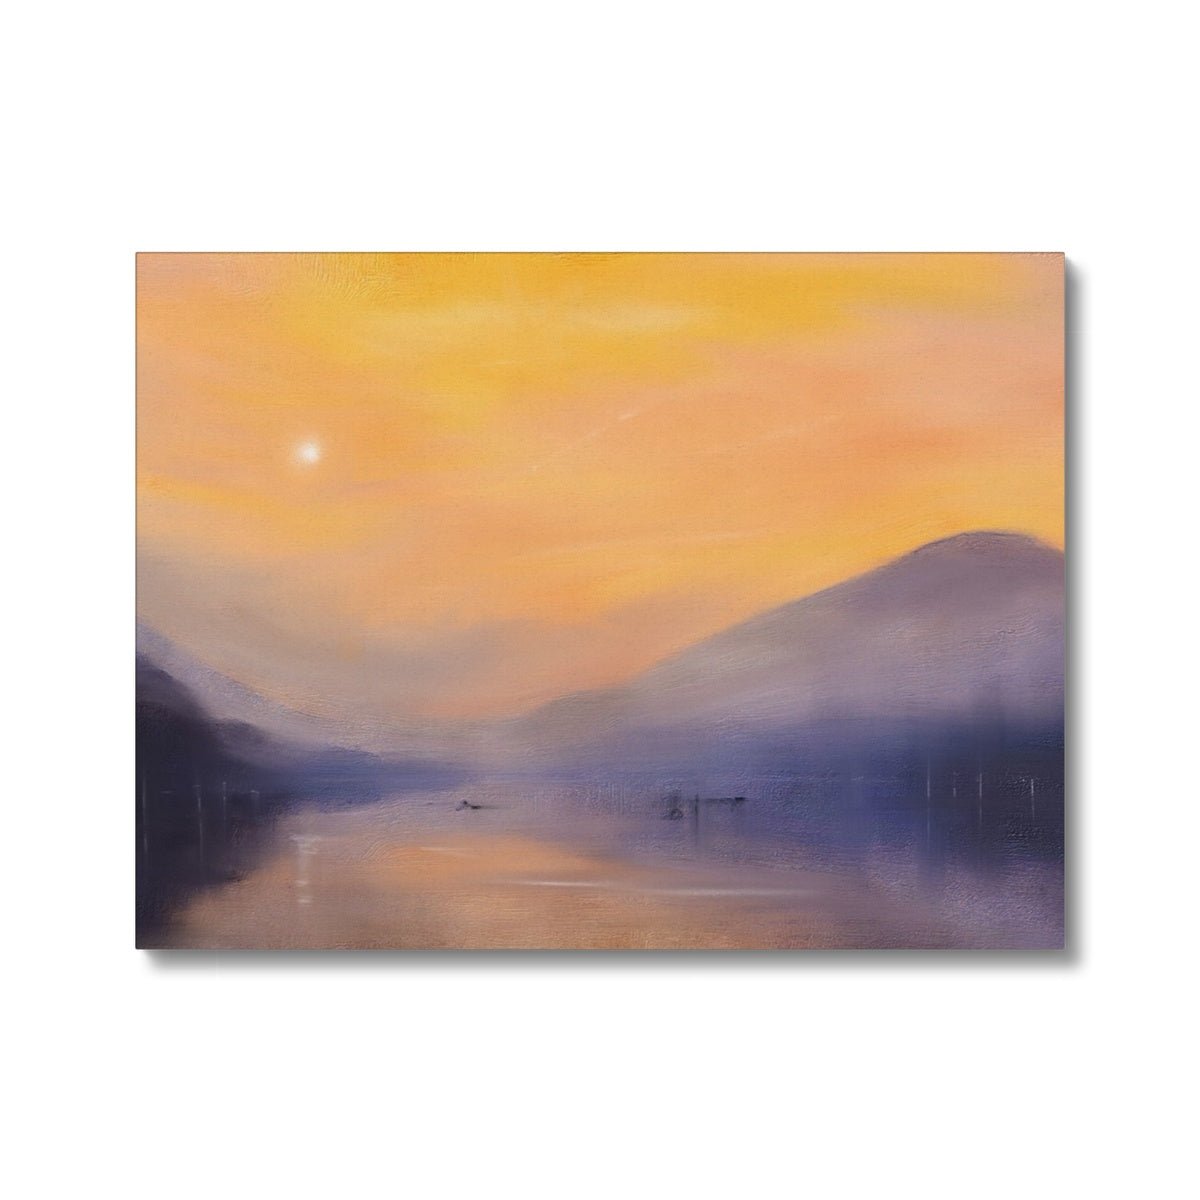 Loch Eck Dusk Painting | Canvas From Scotland-Contemporary Stretched Canvas Prints-Scottish Lochs & Mountains Art Gallery-24"x18"-Paintings, Prints, Homeware, Art Gifts From Scotland By Scottish Artist Kevin Hunter